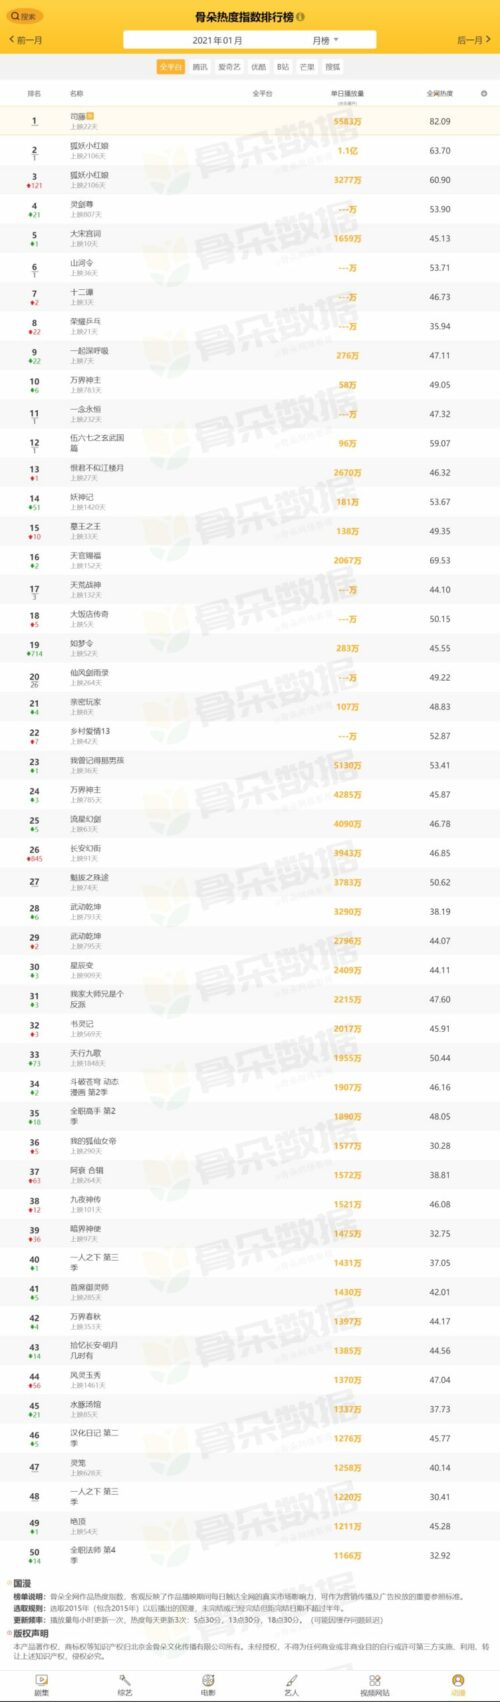 guodo data top most watched chinese anime january 2021